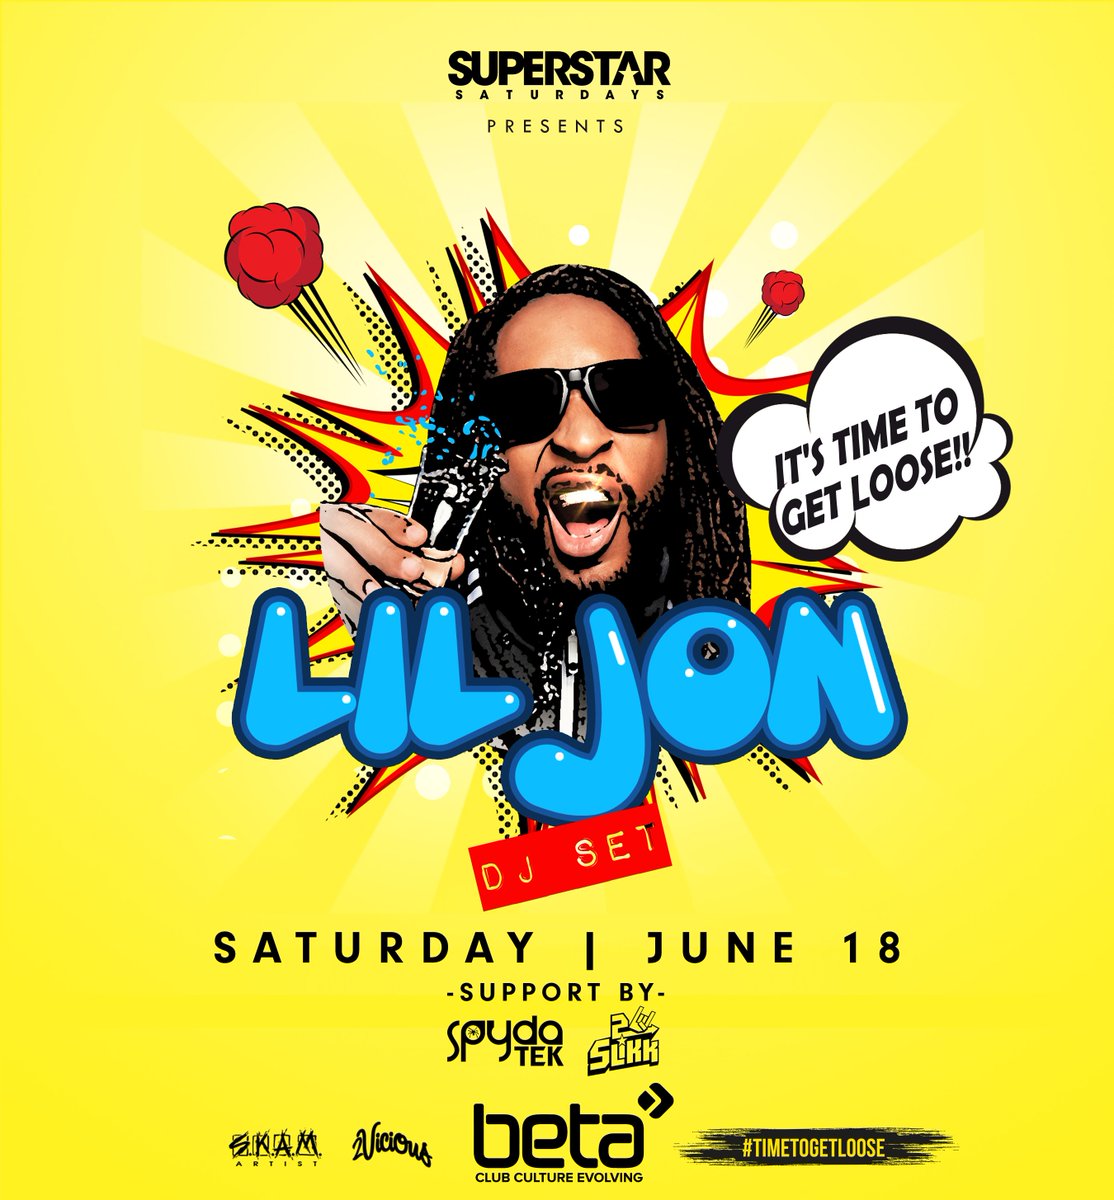 RT @BetaNightclub: Retweet and like this photo for a chance to win tickets to @LilJon this Saturday! https://t.co/ou78g6CjSC